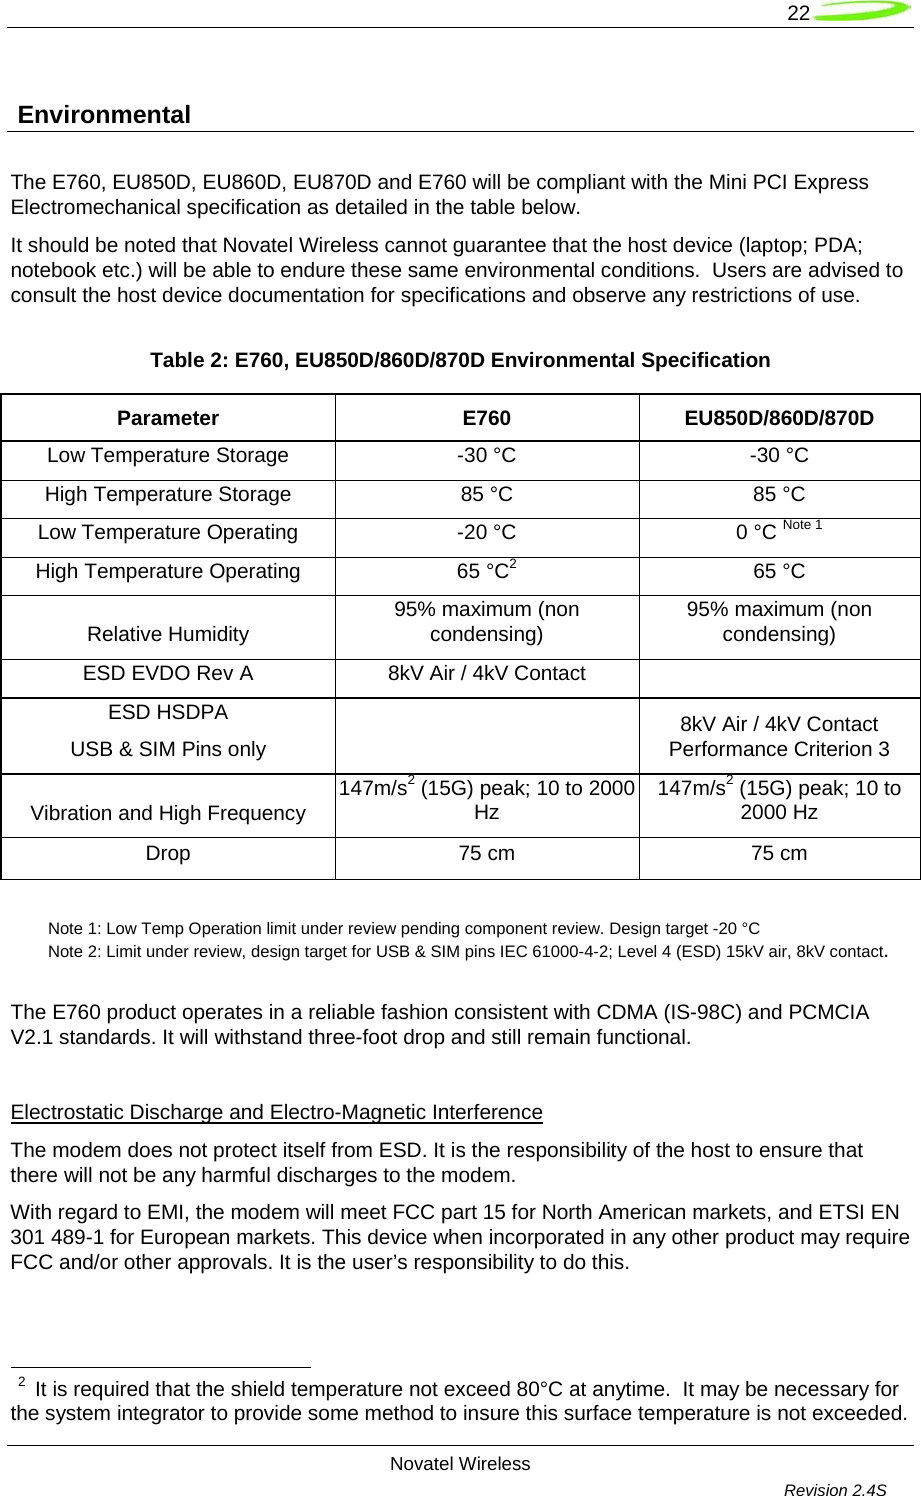   22  Novatel Wireless         Revision 2.4S   Environmental The E760, EU850D, EU860D, EU870D and E760 will be compliant with the Mini PCI Express Electromechanical specification as detailed in the table below. It should be noted that Novatel Wireless cannot guarantee that the host device (laptop; PDA; notebook etc.) will be able to endure these same environmental conditions.  Users are advised to consult the host device documentation for specifications and observe any restrictions of use. Table 2: E760, EU850D/860D/870D Environmental Specification Parameter E760 EU850D/860D/870D Low Temperature Storage  -30 °C  -30 °C High Temperature Storage  85 °C  85 °C Low Temperature Operating  -20 °C  0 °C Note 1 High Temperature Operating  65 °C2 65 °C Relative Humidity  95% maximum (non condensing)  95% maximum (non condensing) ESD EVDO Rev A  8kV Air / 4kV Contact   ESD HSDPA  USB &amp; SIM Pins only     8kV Air / 4kV Contact Performance Criterion 3 Vibration and High Frequency  147m/s2(15G) peak; 10 to 2000 Hz  147m/s2 (15G) peak; 10 to 2000 Hz Drop  75 cm  75 cm   Note 1: Low Temp Operation limit under review pending component review. Design target -20 °C  Note 2: Limit under review, design target for USB &amp; SIM pins IEC 61000-4-2; Level 4 (ESD) 15kV air, 8kV contact.  The E760 product operates in a reliable fashion consistent with CDMA (IS-98C) and PCMCIA V2.1 standards. It will withstand three-foot drop and still remain functional.  Electrostatic Discharge and Electro-Magnetic Interference The modem does not protect itself from ESD. It is the responsibility of the host to ensure that there will not be any harmful discharges to the modem.  With regard to EMI, the modem will meet FCC part 15 for North American markets, and ETSI EN 301 489-1 for European markets. This device when incorporated in any other product may require FCC and/or other approvals. It is the user’s responsibility to do this.                                                          2  It is required that the shield temperature not exceed 80°C at anytime.  It may be necessary for the system integrator to provide some method to insure this surface temperature is not exceeded. 